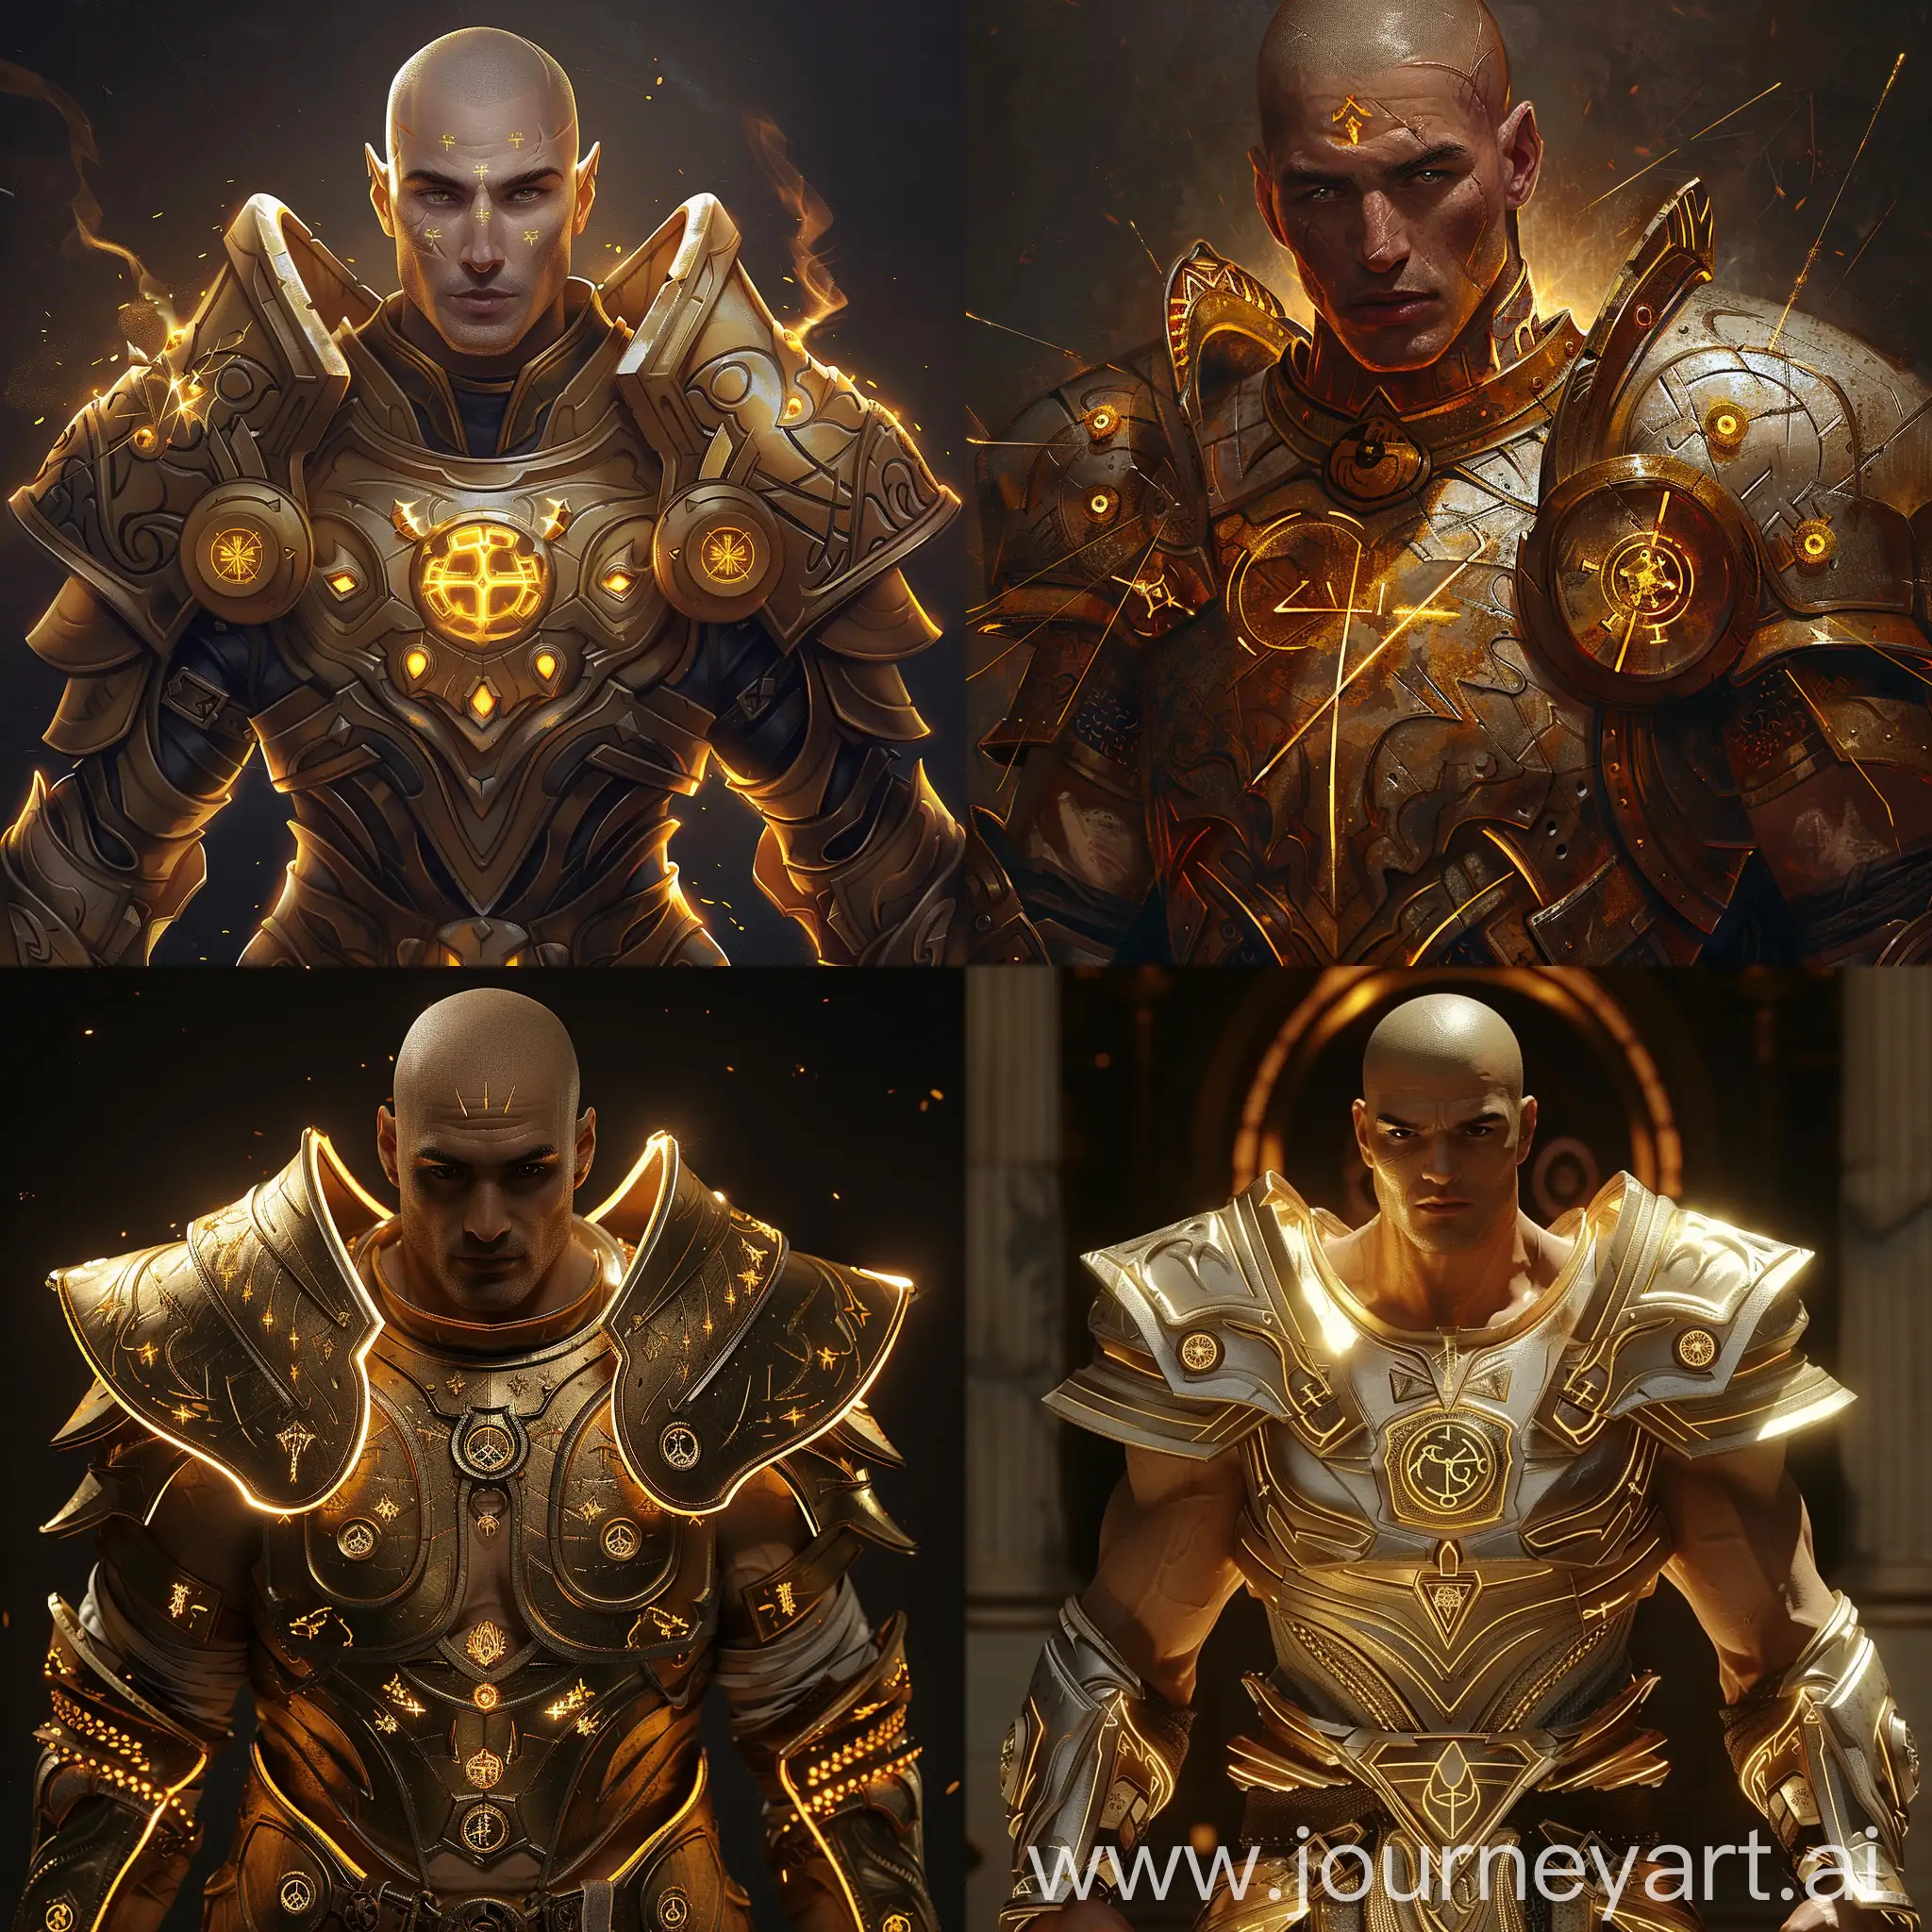 beautiful 30s-years old man with ideal face features, golden tanned skin, golden glowing small symbols, muscular, completely bald and shaved, paladin armor,  dark lines and circles engraved on massive armor, golden armor trim in the form of sun rays.